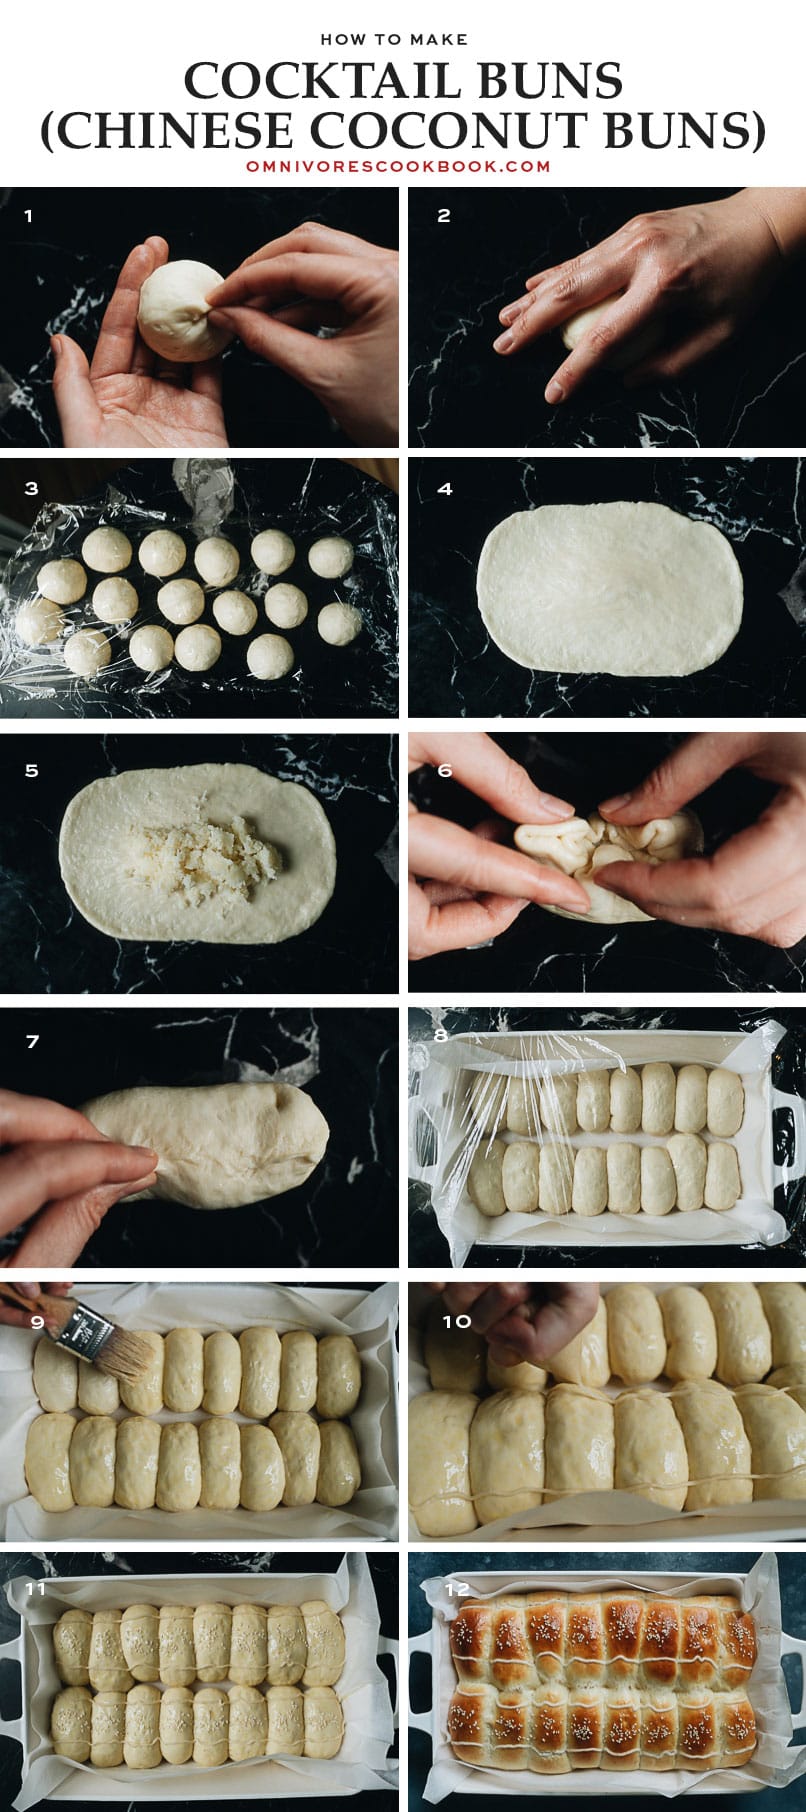 How to assemble coconut buns step-by-step